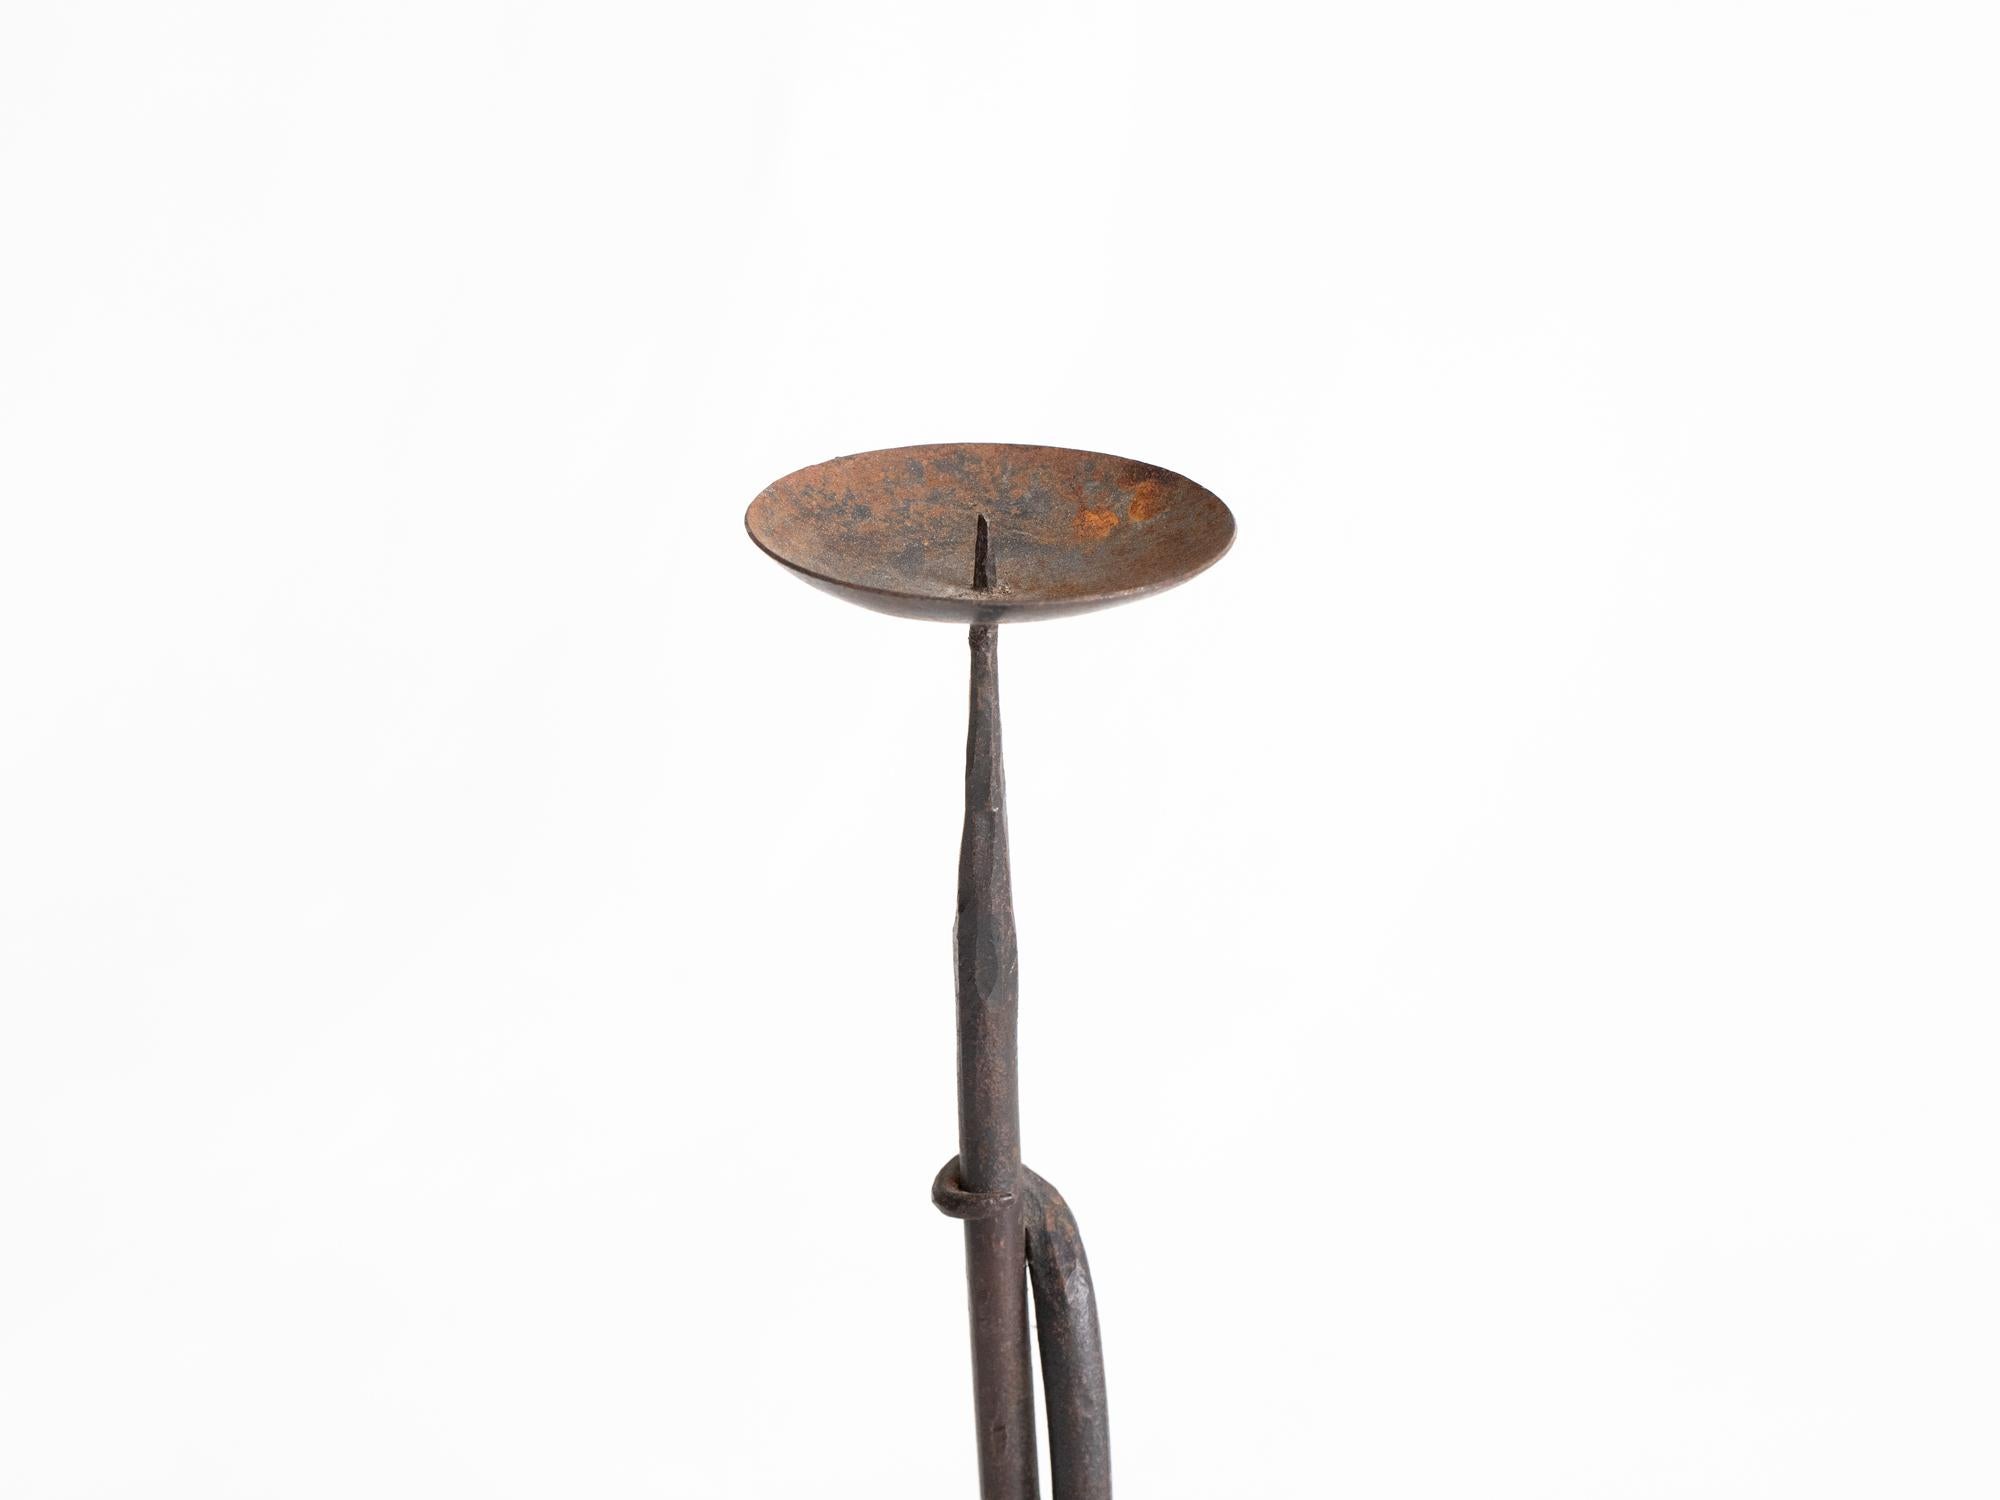 A pair of handcrafted forged iron candlesticks in the manner of Jean Touret and the artisans of Marolles and Loir-et-Cher. French, c. 1960.

54 x 20 x 18 cm

21.3 x 7.9 x 7.1 